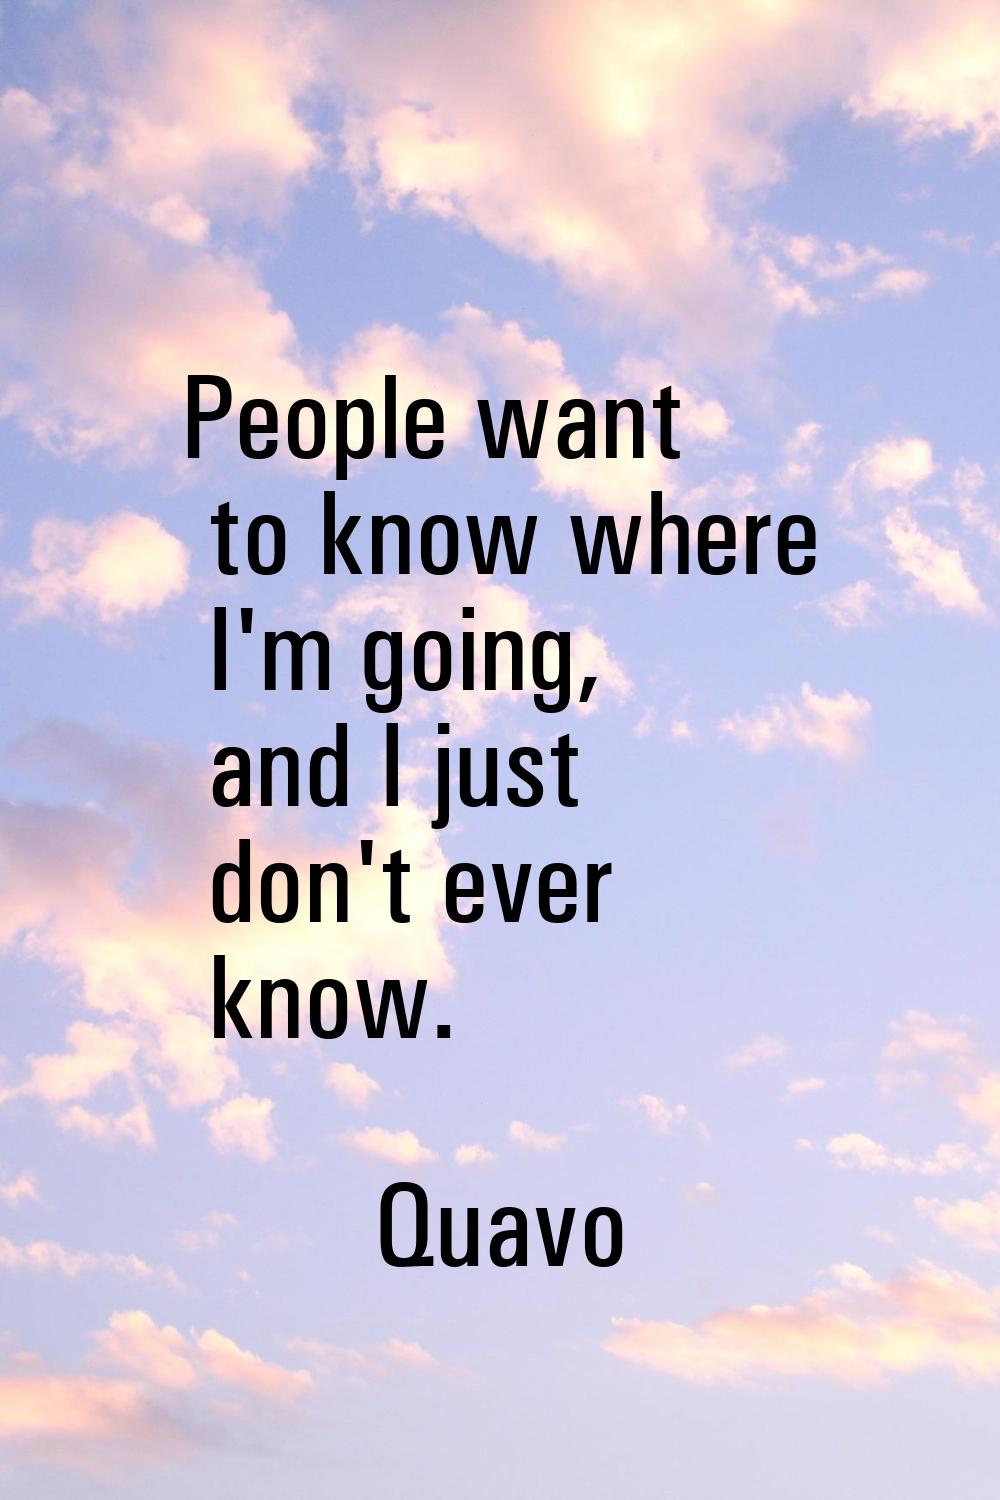 People want to know where I'm going, and I just don't ever know.